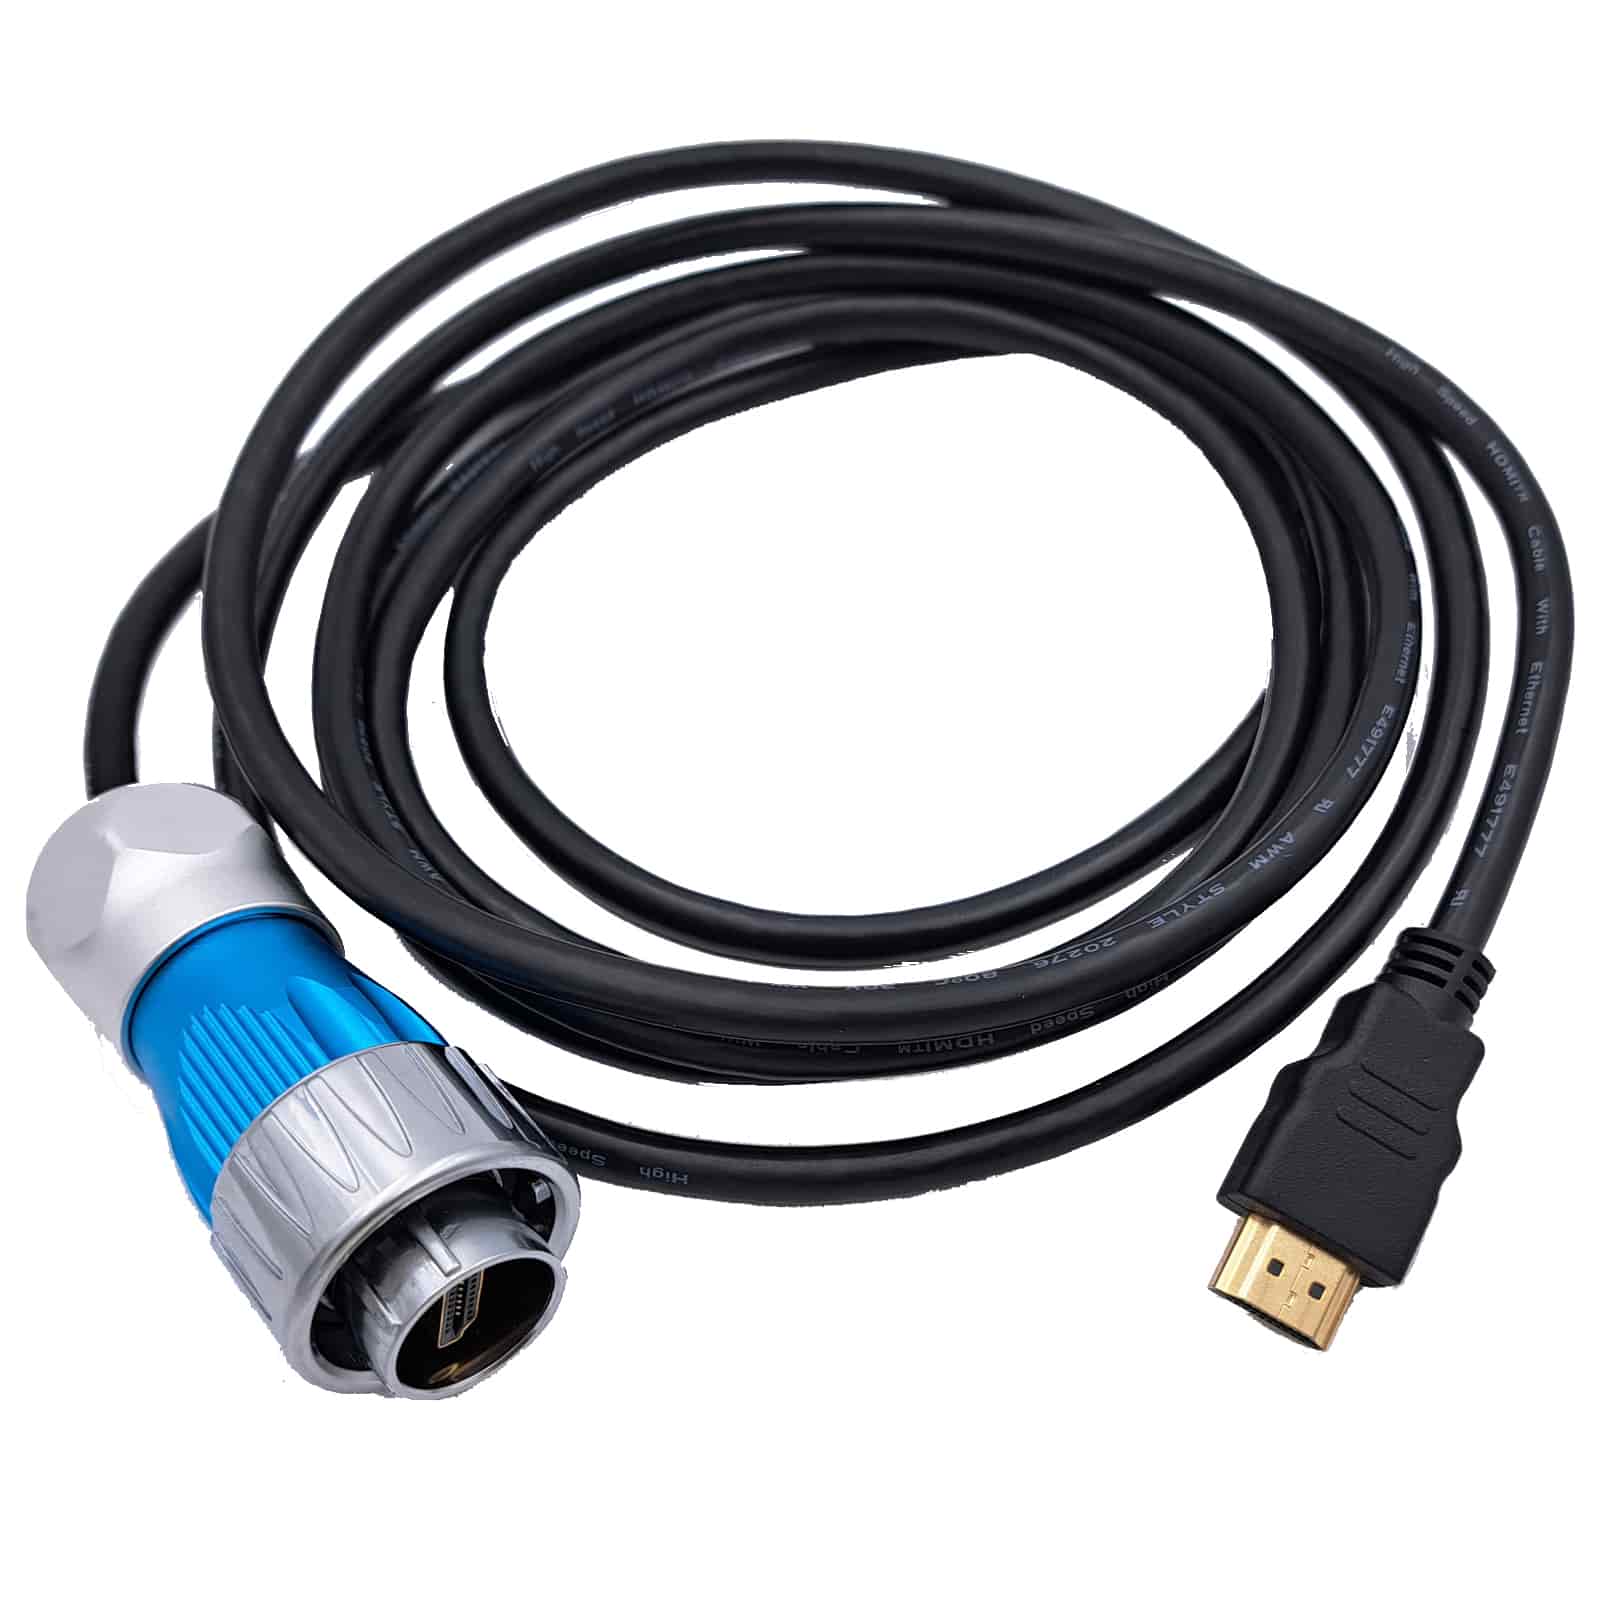 Oude man extreem Voorganger CNLINKO DH-24 Series Cable Connector HDMI 3 Meters IP67 | ENOVA Solutions  AG Connectors & Cables English